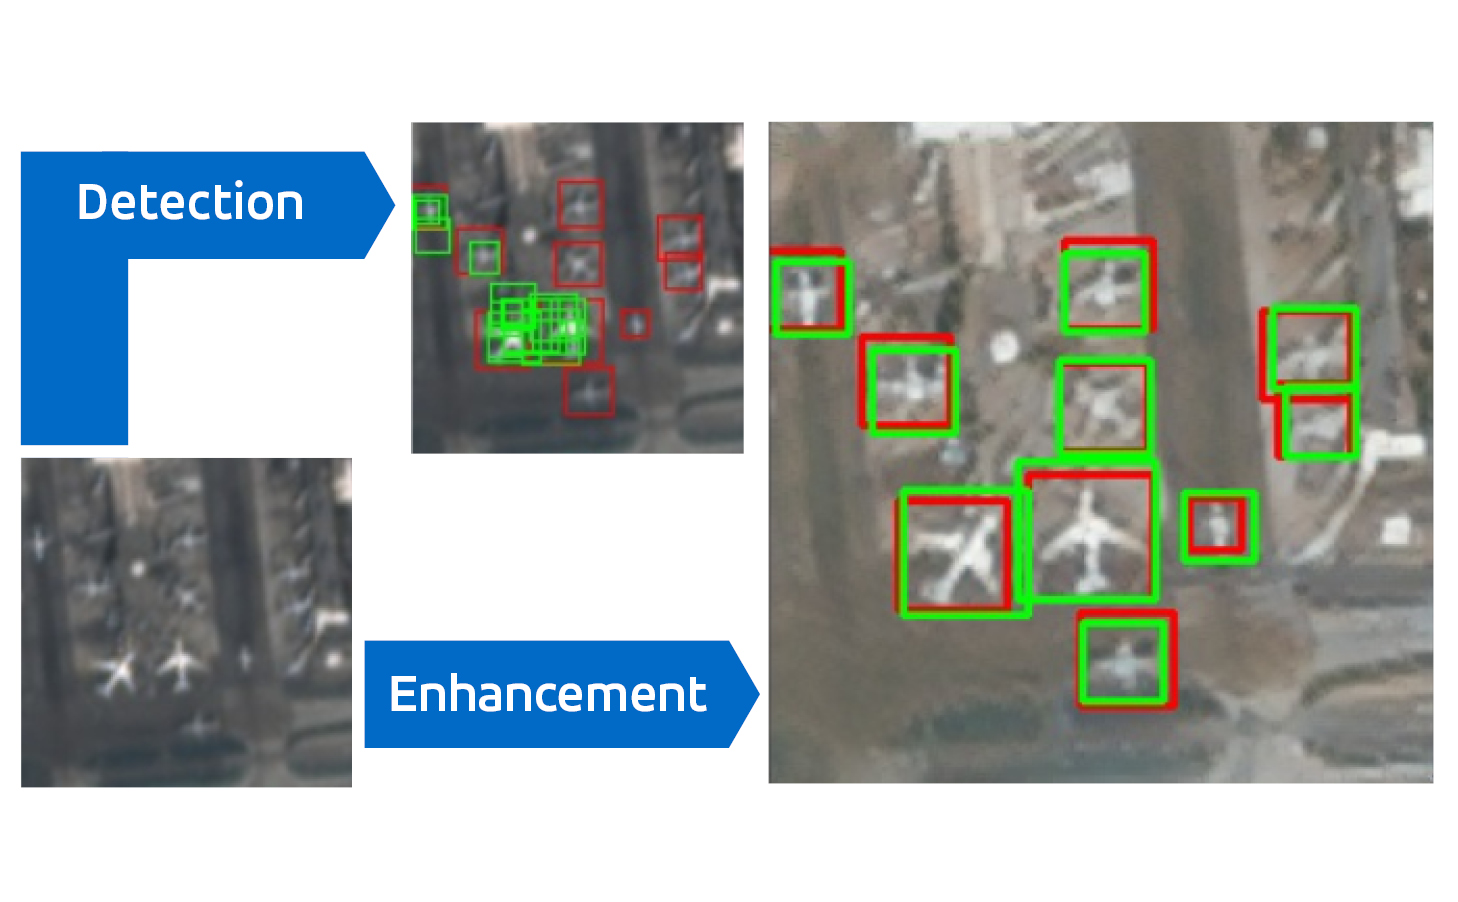 Low quality screenshot showing identification of planes for only a few planes while another screenshot shows identification of all planes in low quality screenshot.